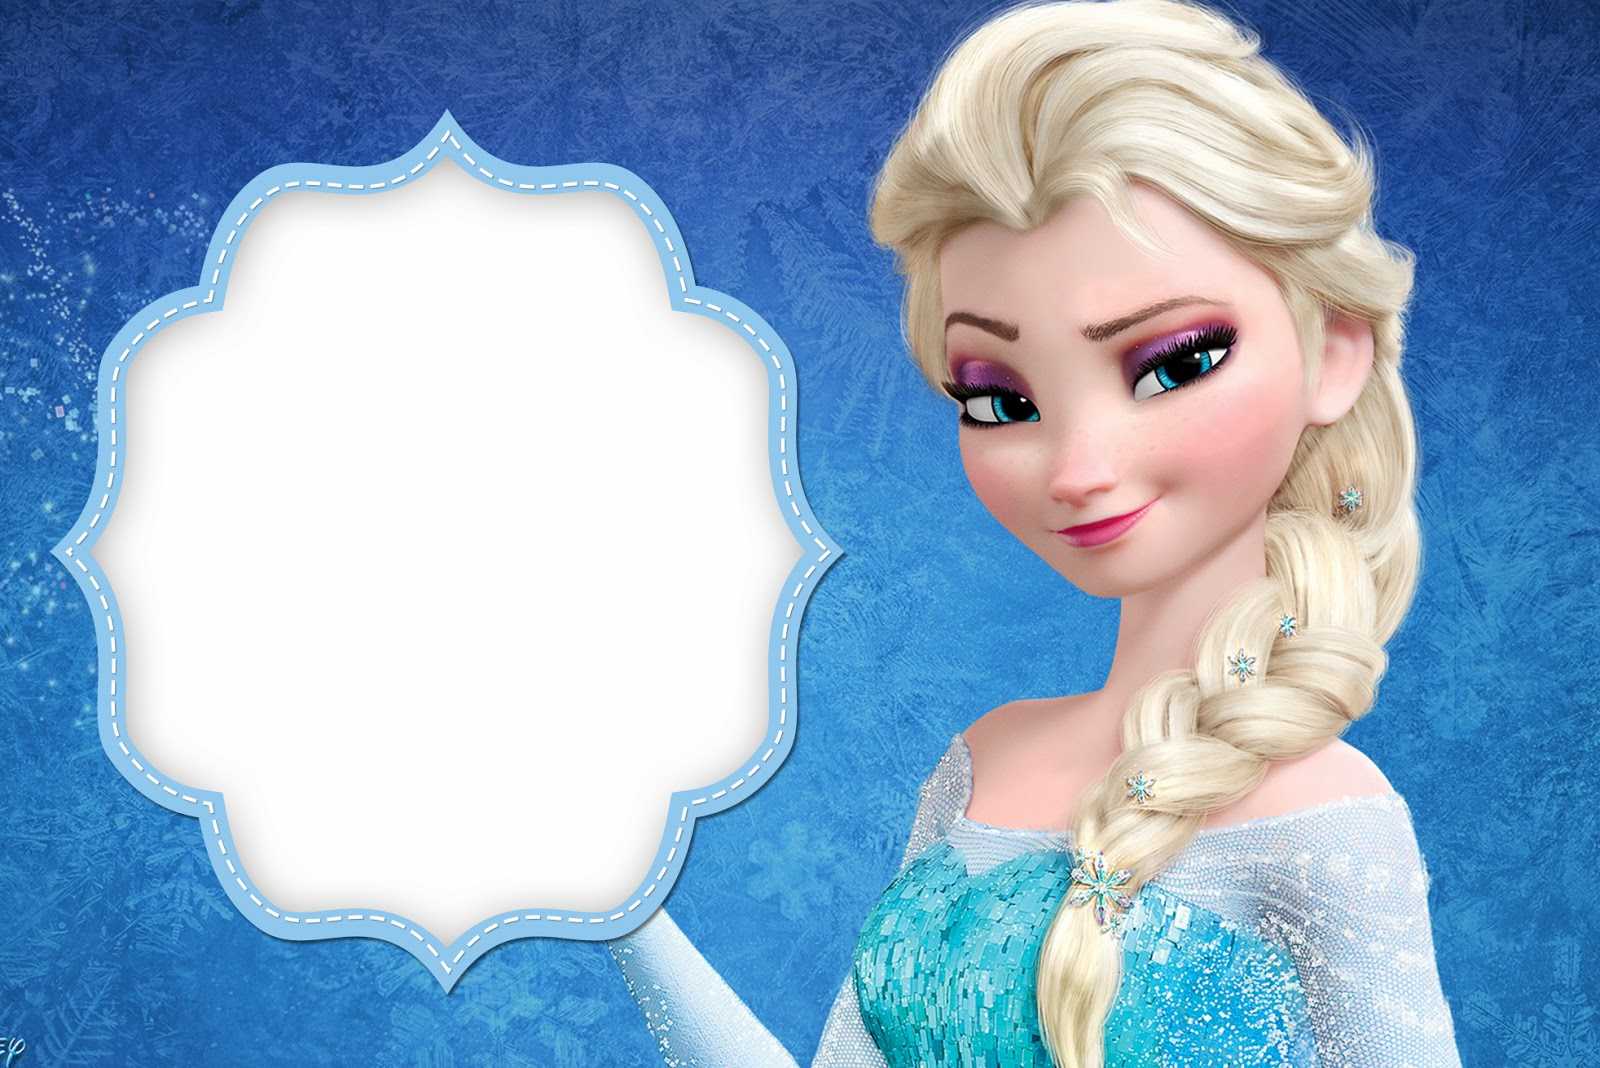 Frozen: Free Printable Cards Or Party Invitations. – Oh My For Frozen Birthday Card Template